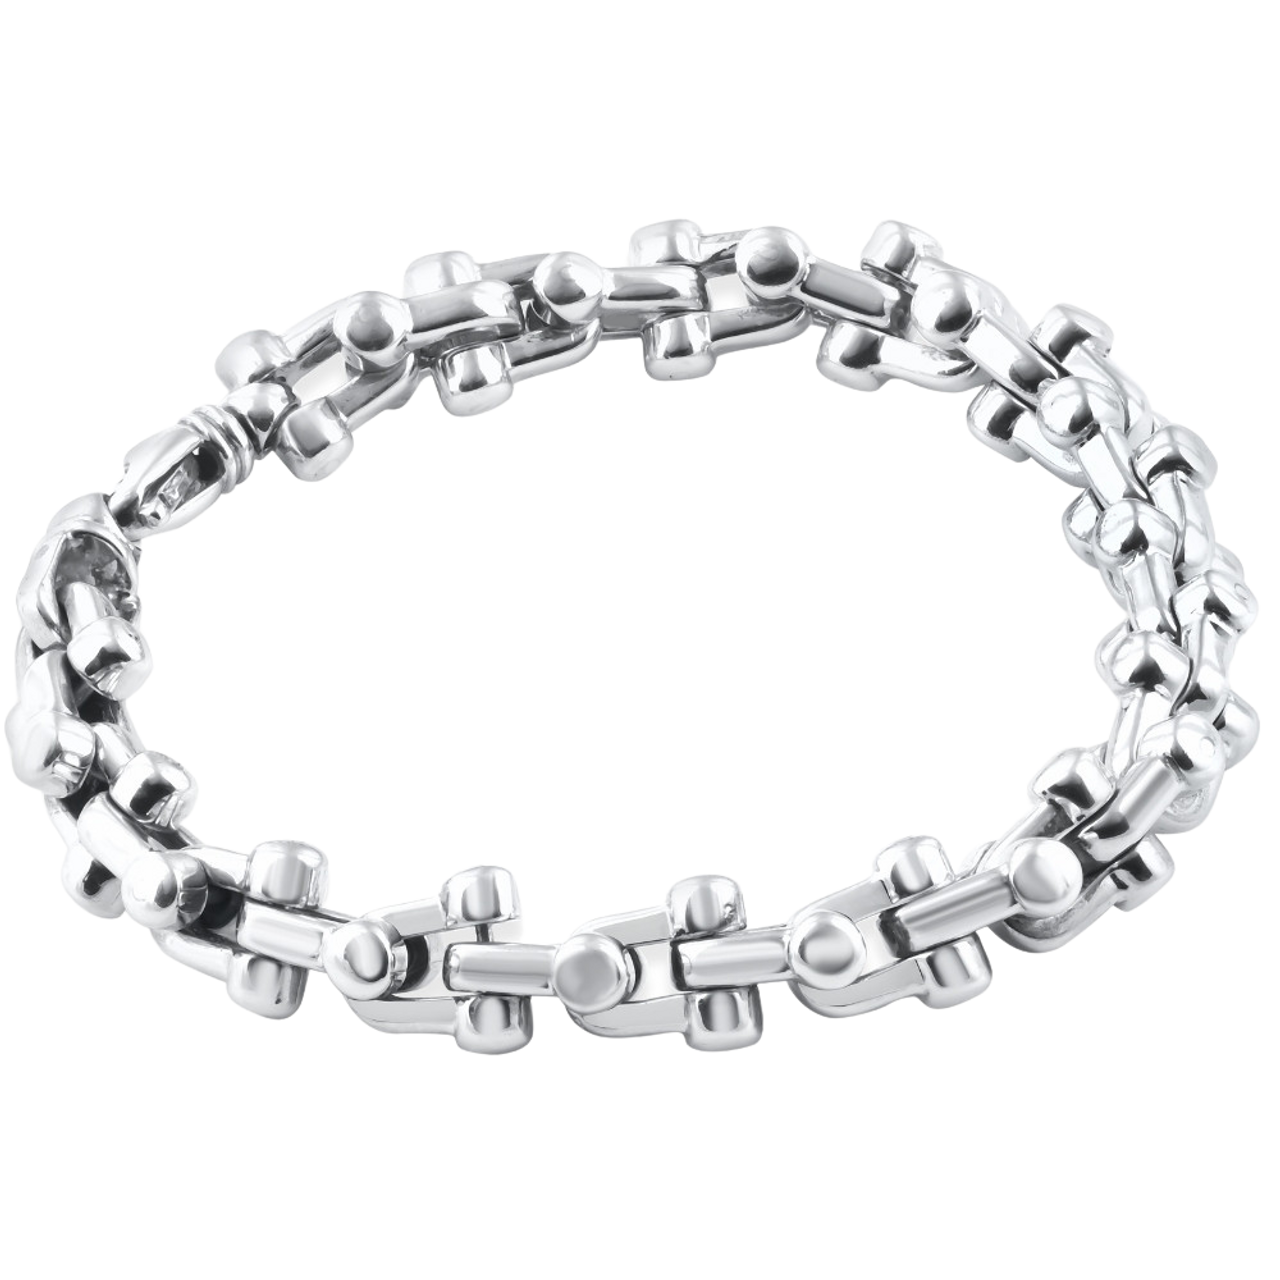 Amazon.com: Baronyka Handmade Thick Silver Bracelet for Men, Stainless  Steel, Men's Rope Chain Bracelet, Mens Link Bracelets (9.5, Silver-Plated)  : Handmade Products